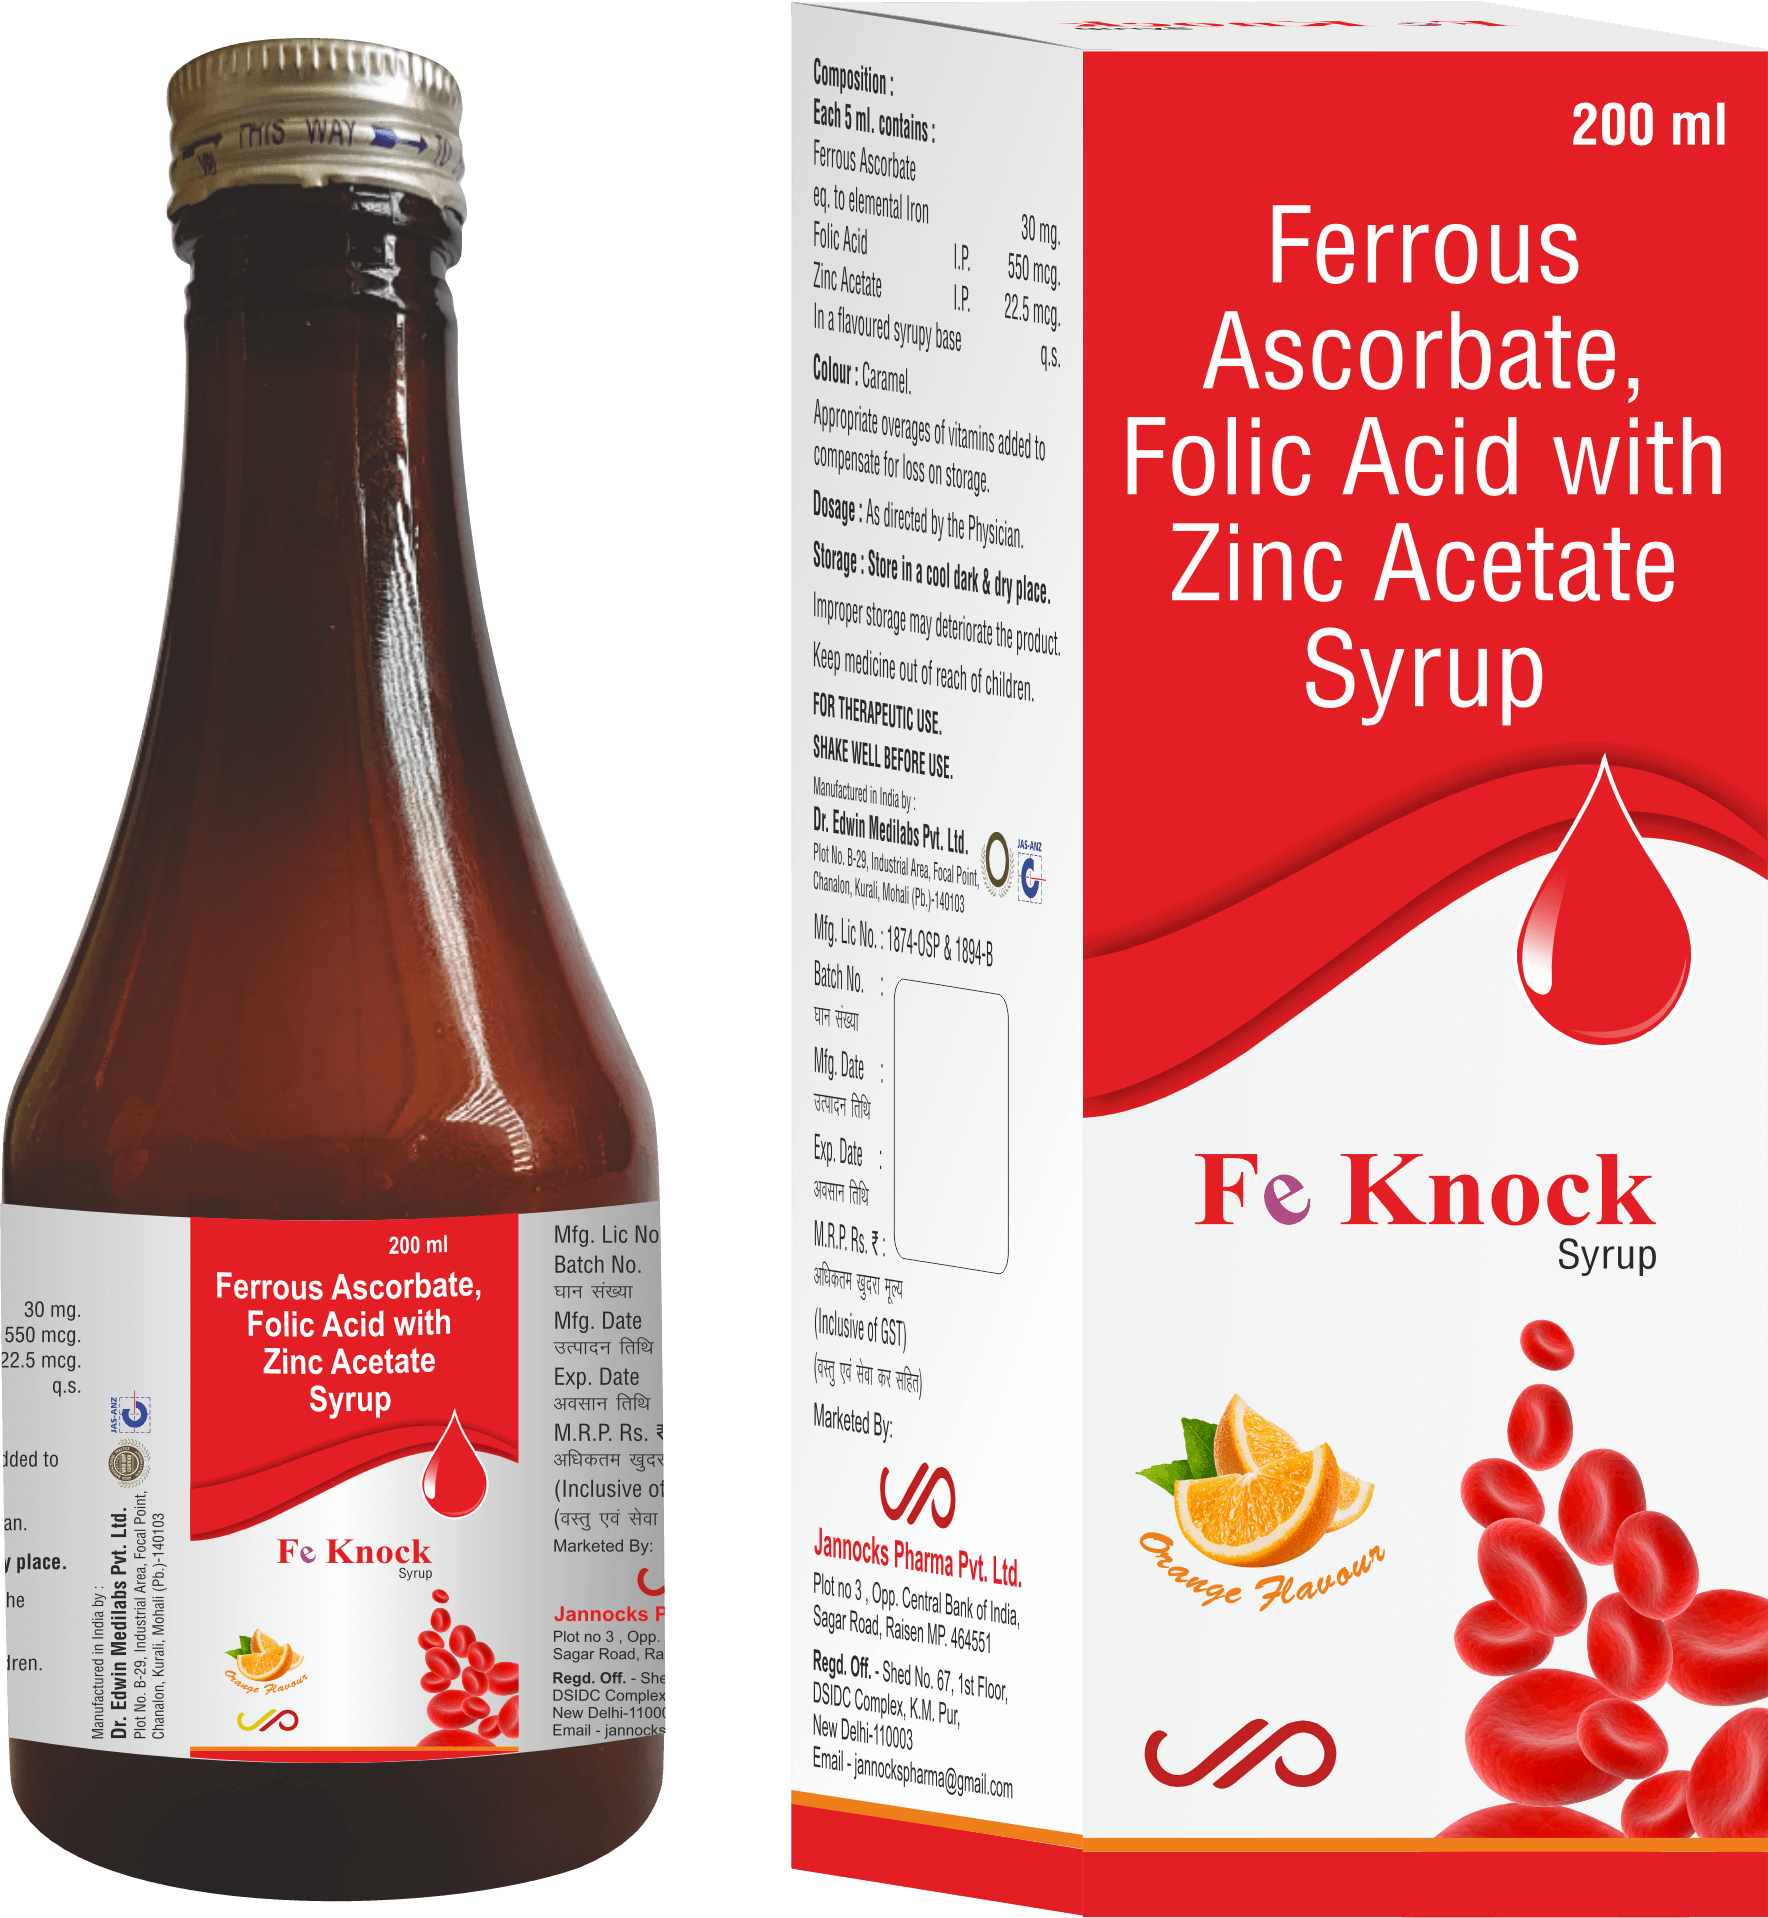 Fe Knock Syrup